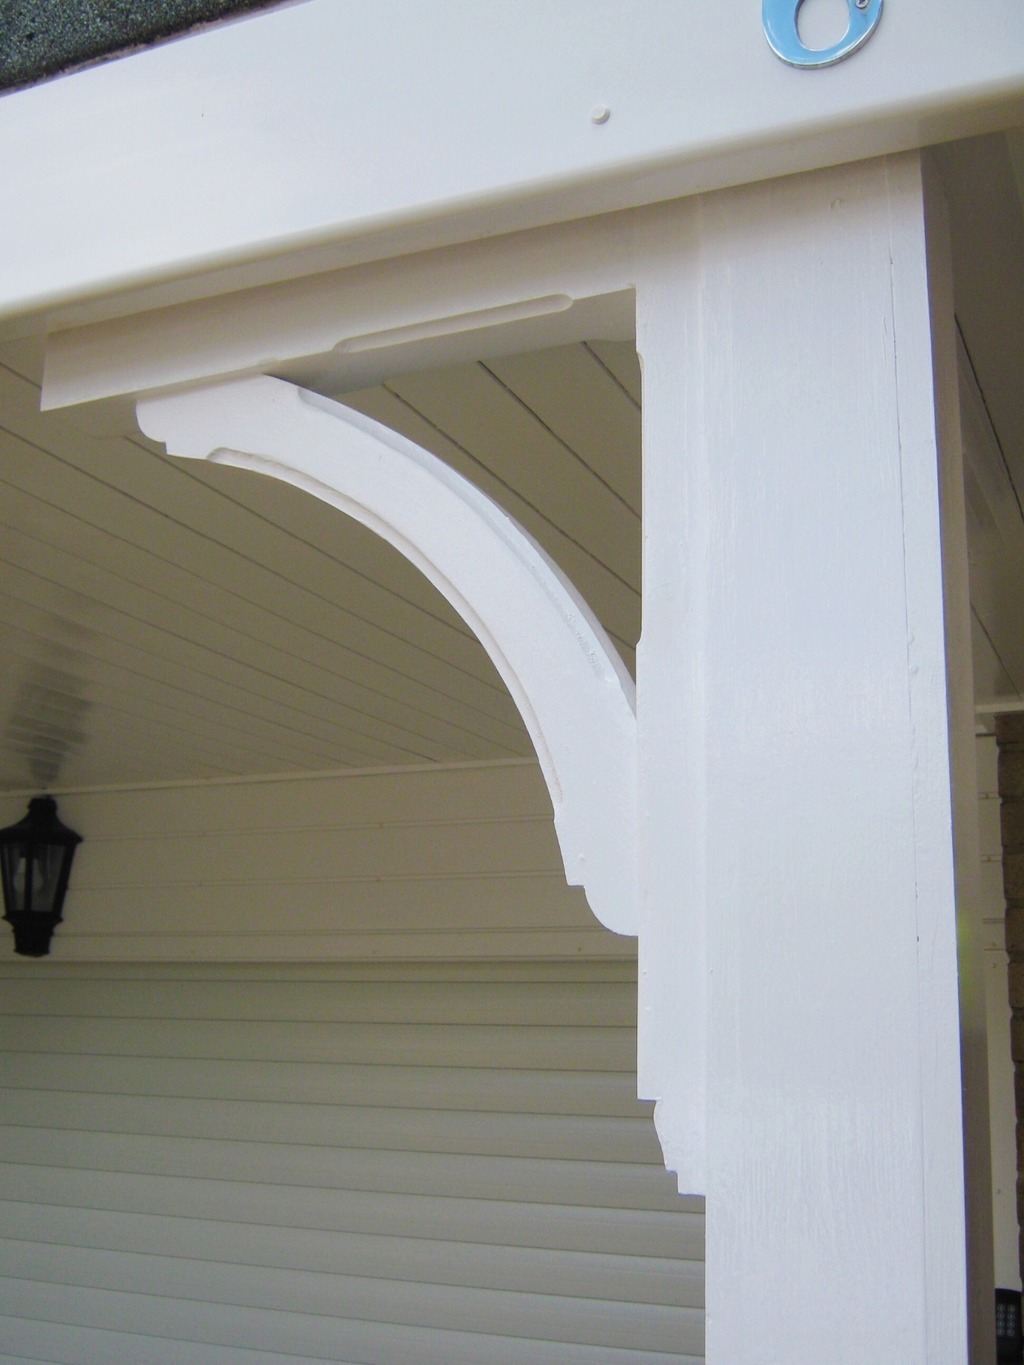 George woods white curved gallows bracket